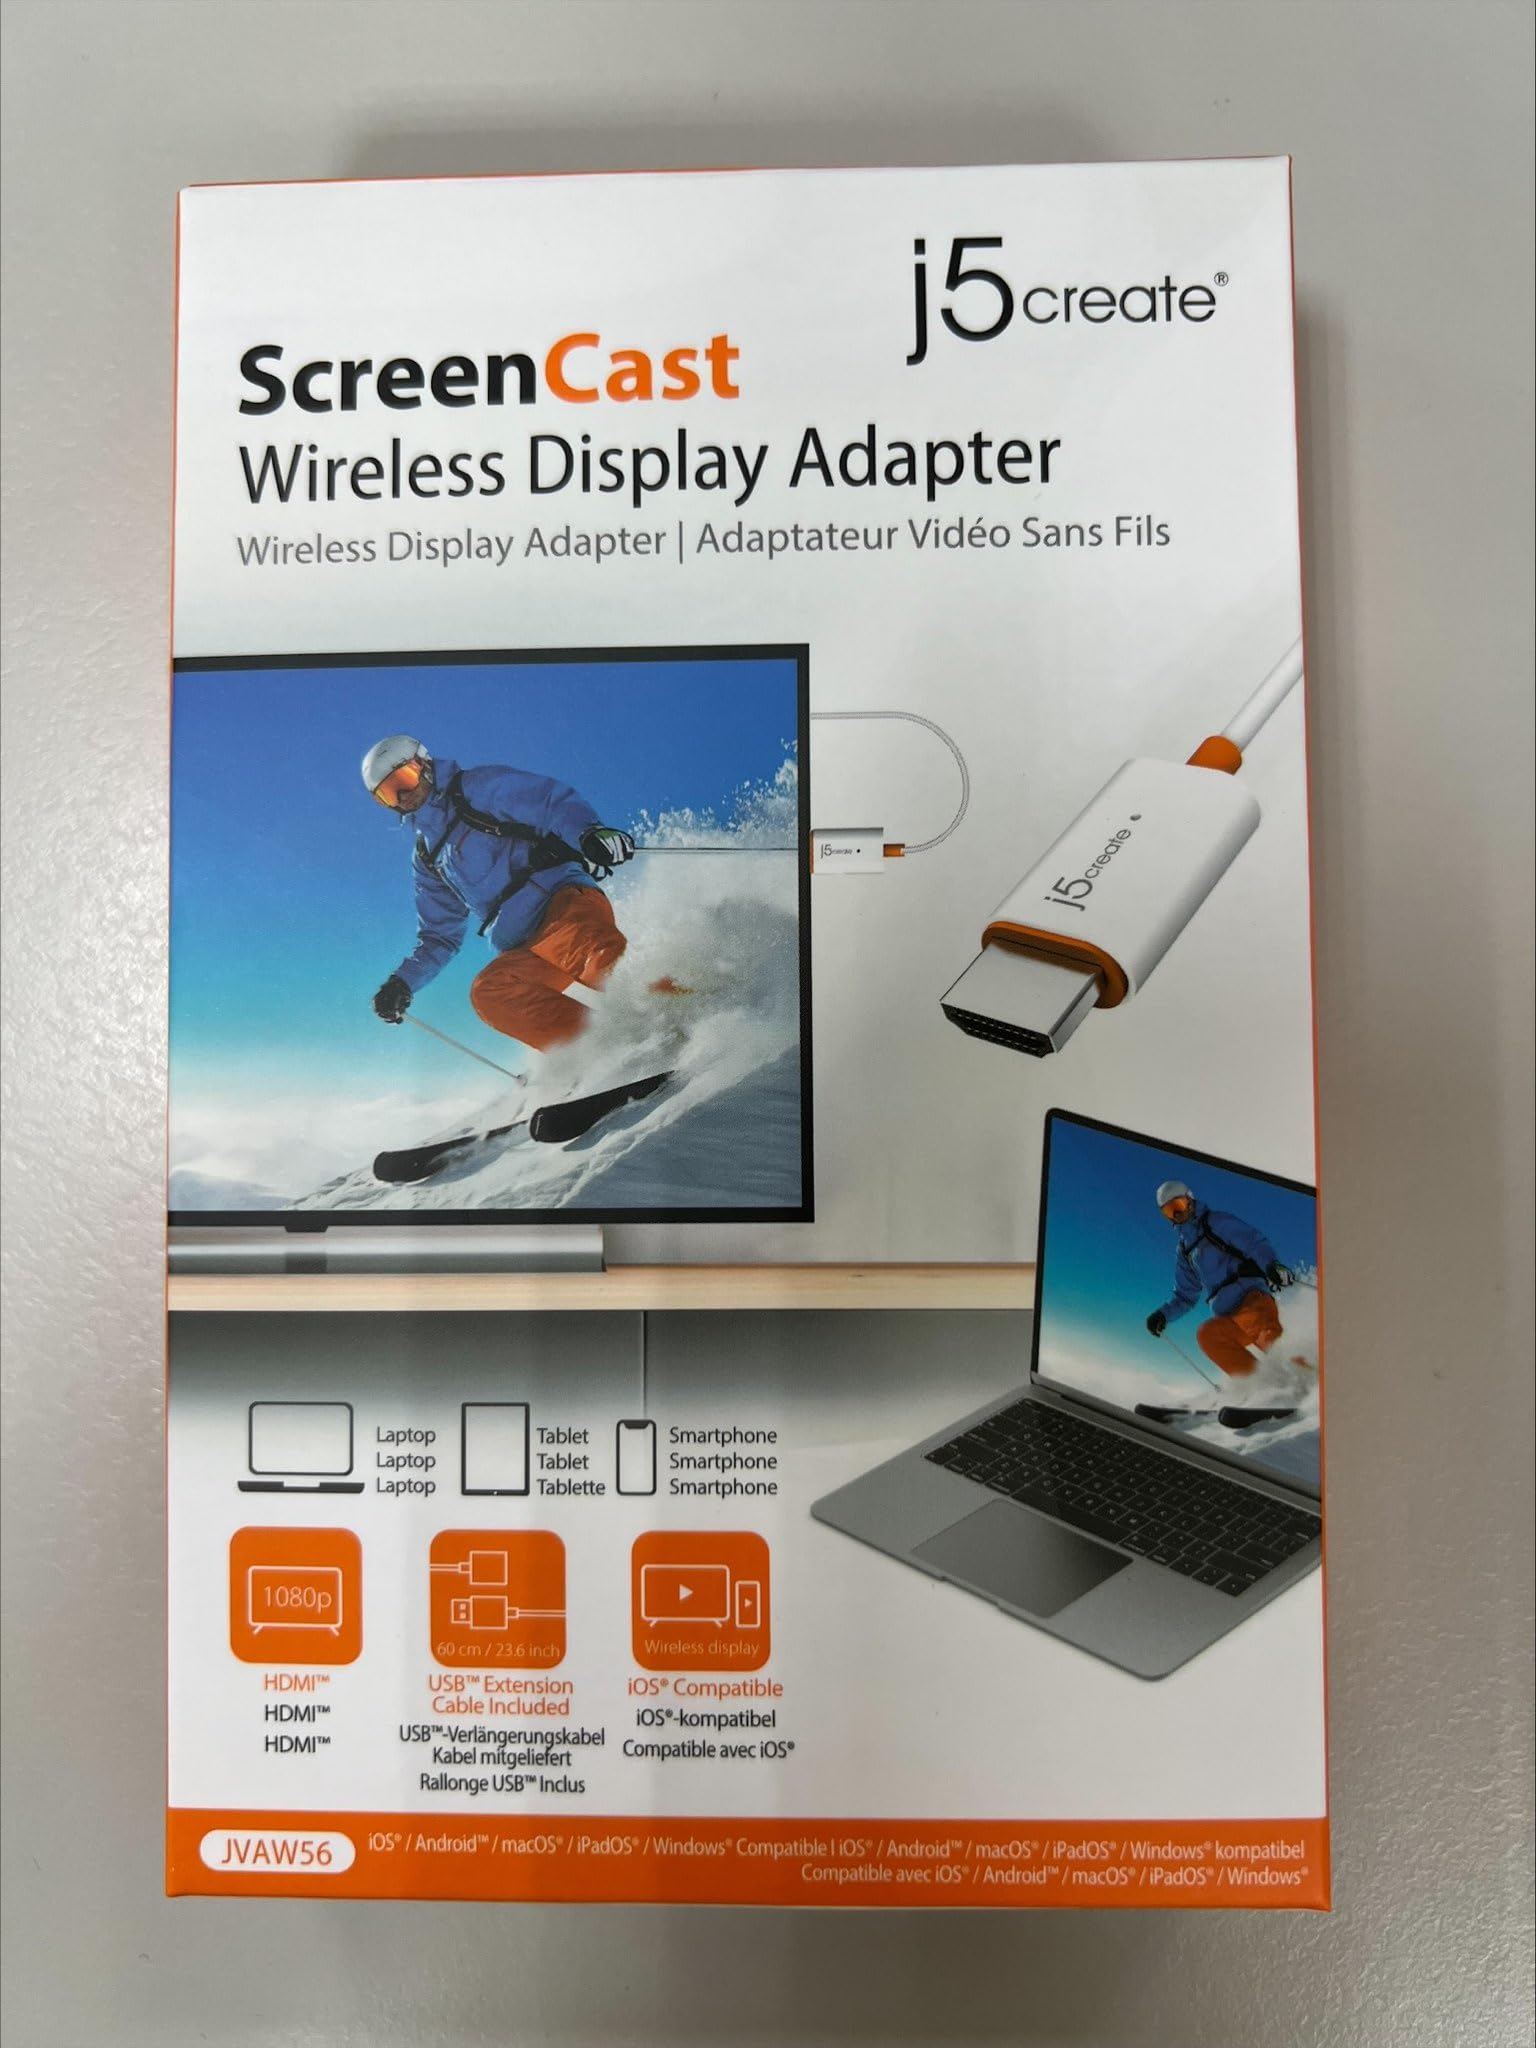 j5create ScreenCast HDMI Wireless Display Adapter Receiver - Mirror Phone, Tablet, Laptop to HDTV - Compatible with MiraCast, AirPlay, Android, Windows 10 PC, iOS, iPhone, Tablet (JVAW56)